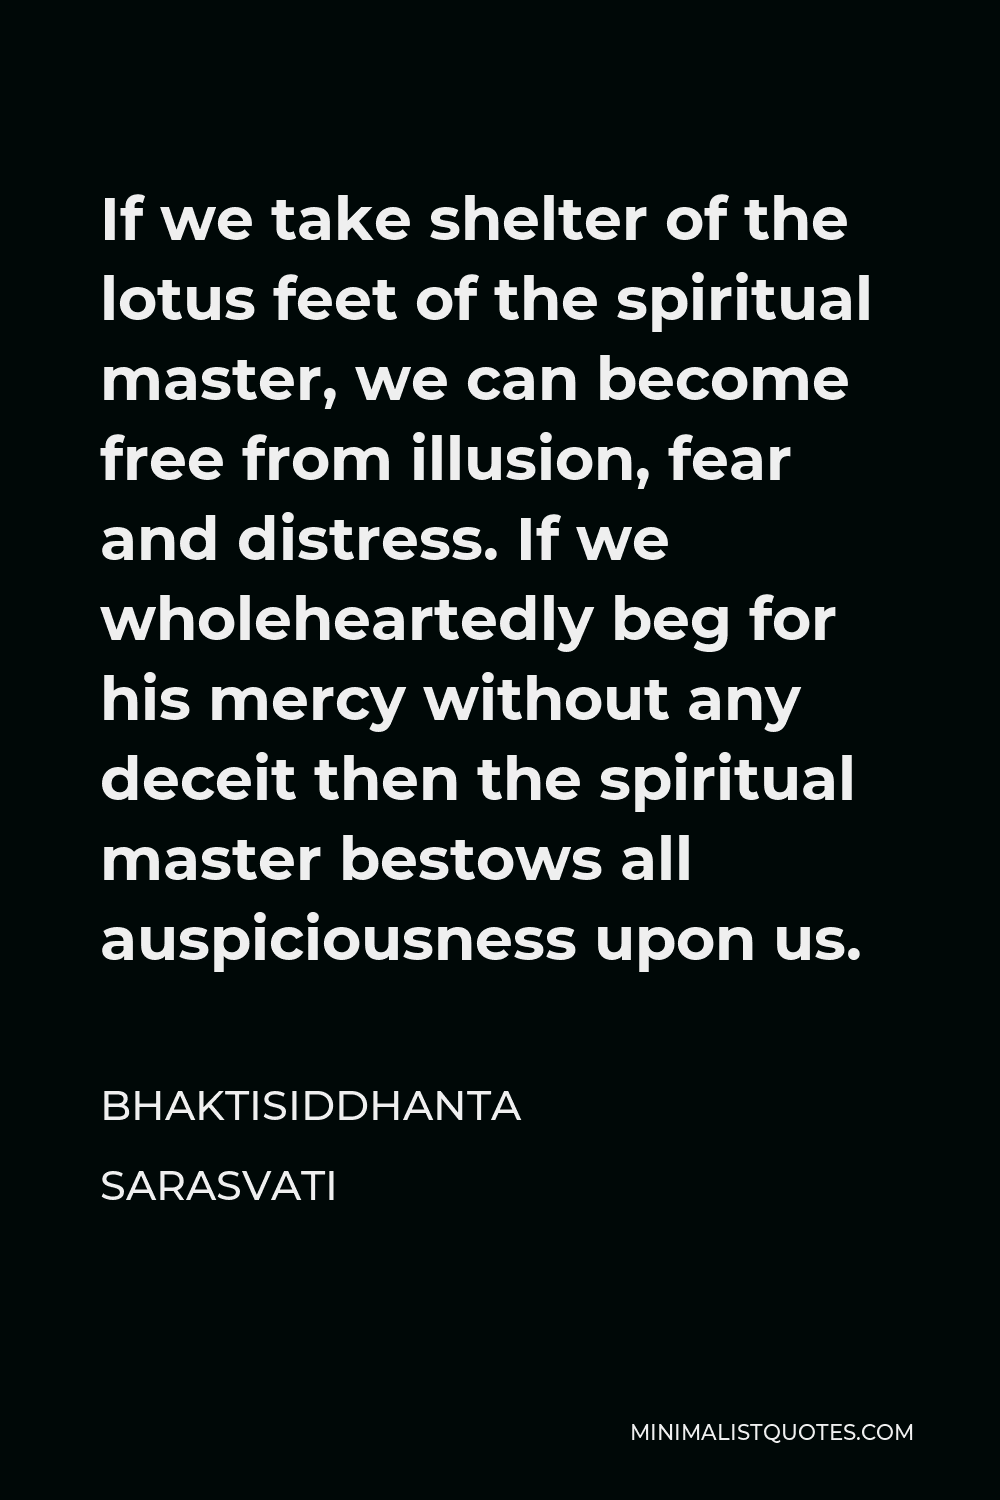 Bhaktisiddhanta Sarasvati Quote - If we take shelter of the lotus feet of the spiritual master, we can become free from illusion, fear and distress. If we wholeheartedly beg for his mercy without any deceit then the spiritual master bestows all auspiciousness upon us.